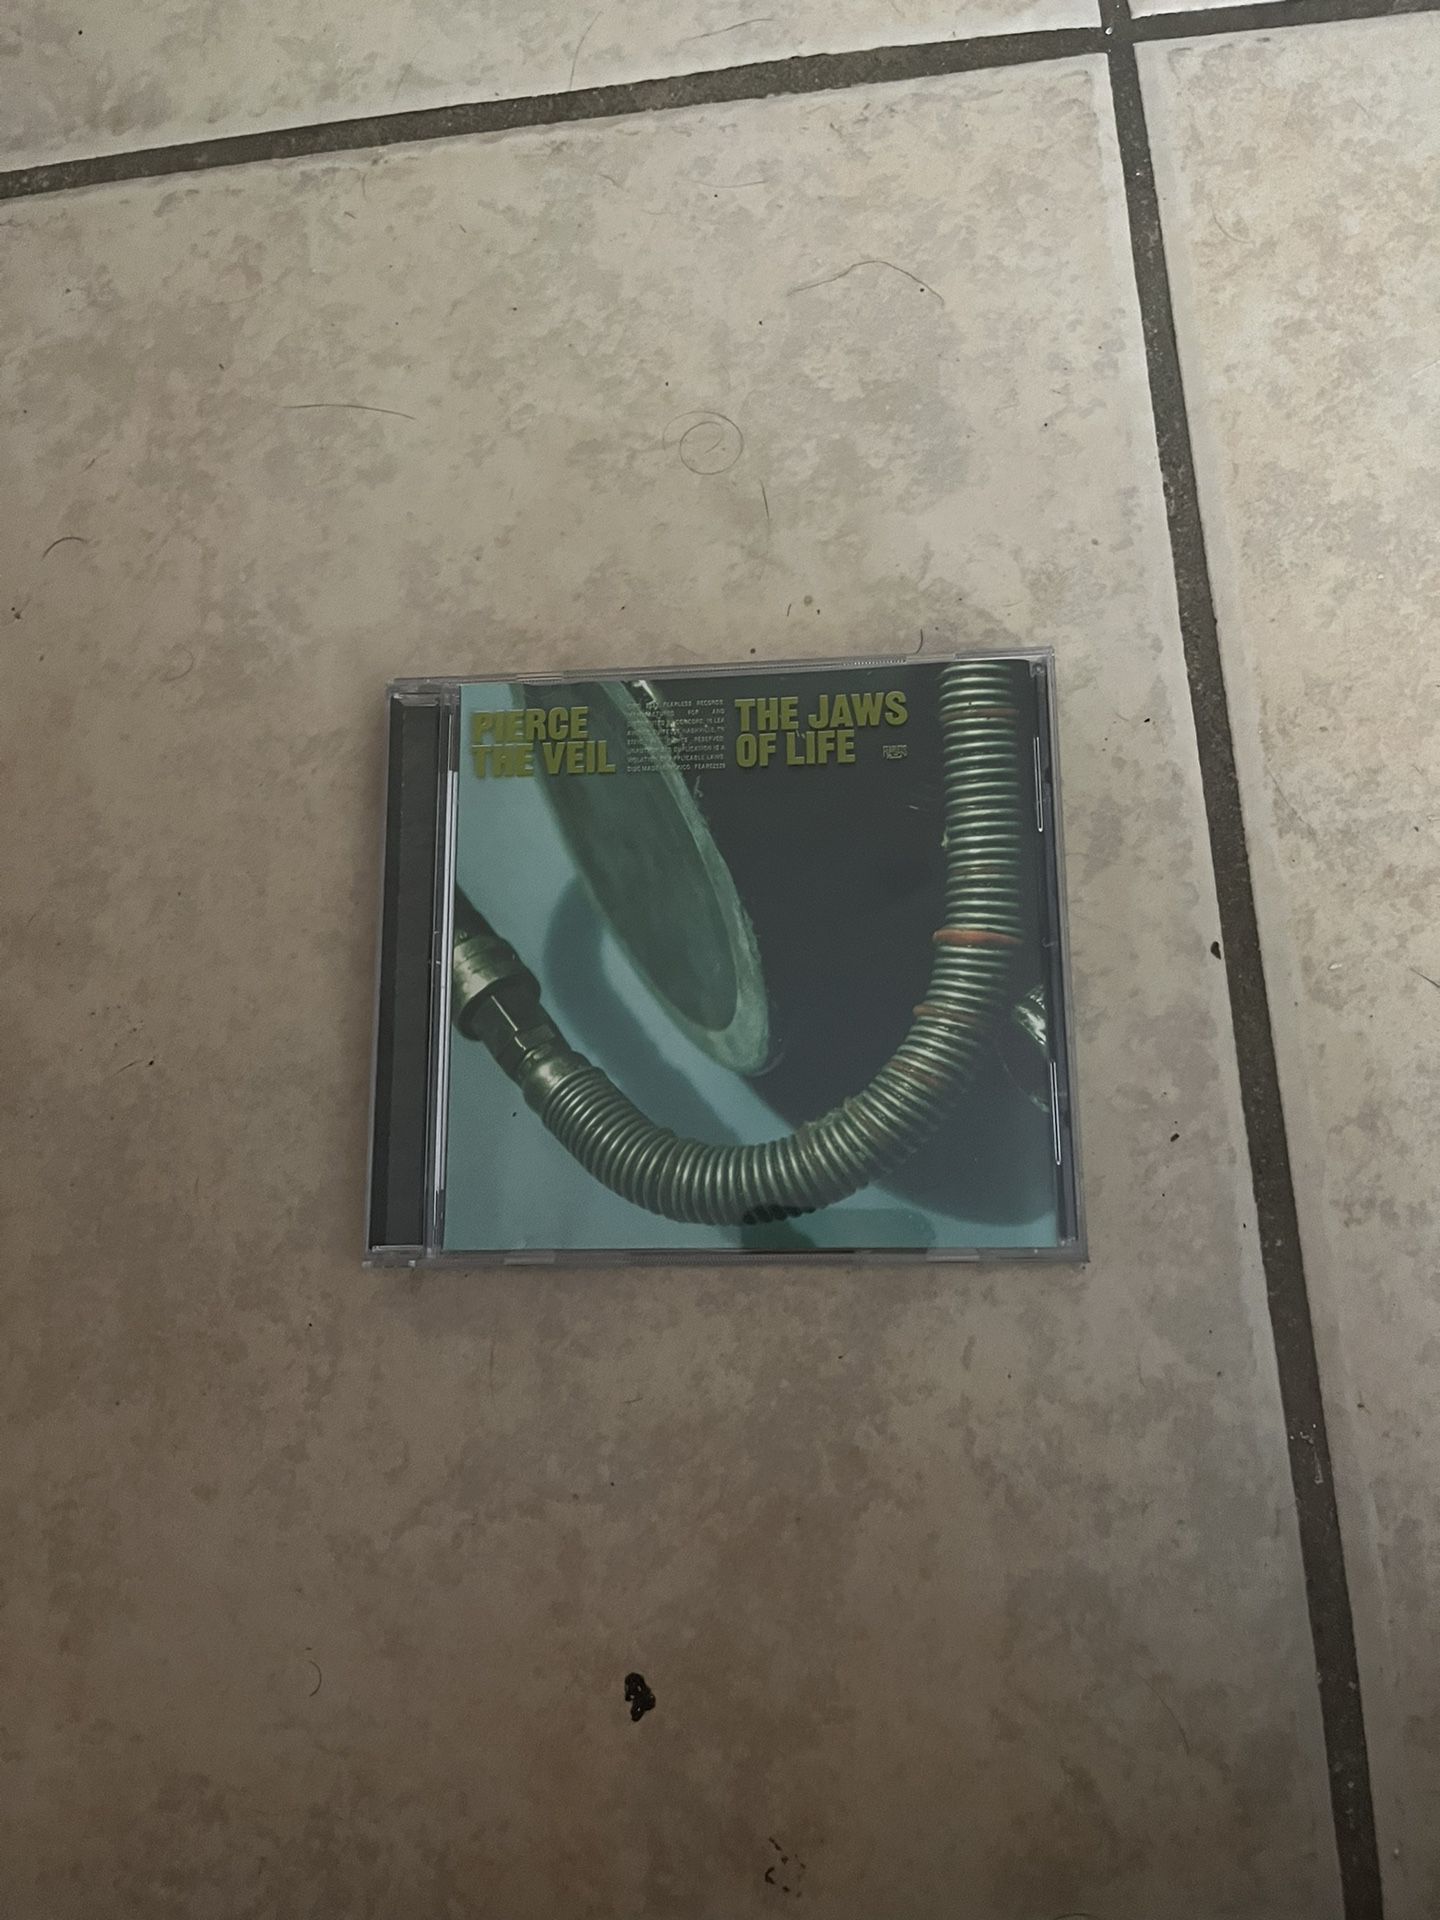 Pierce The Veil “Jaws Of Life” Target Exclusive CD